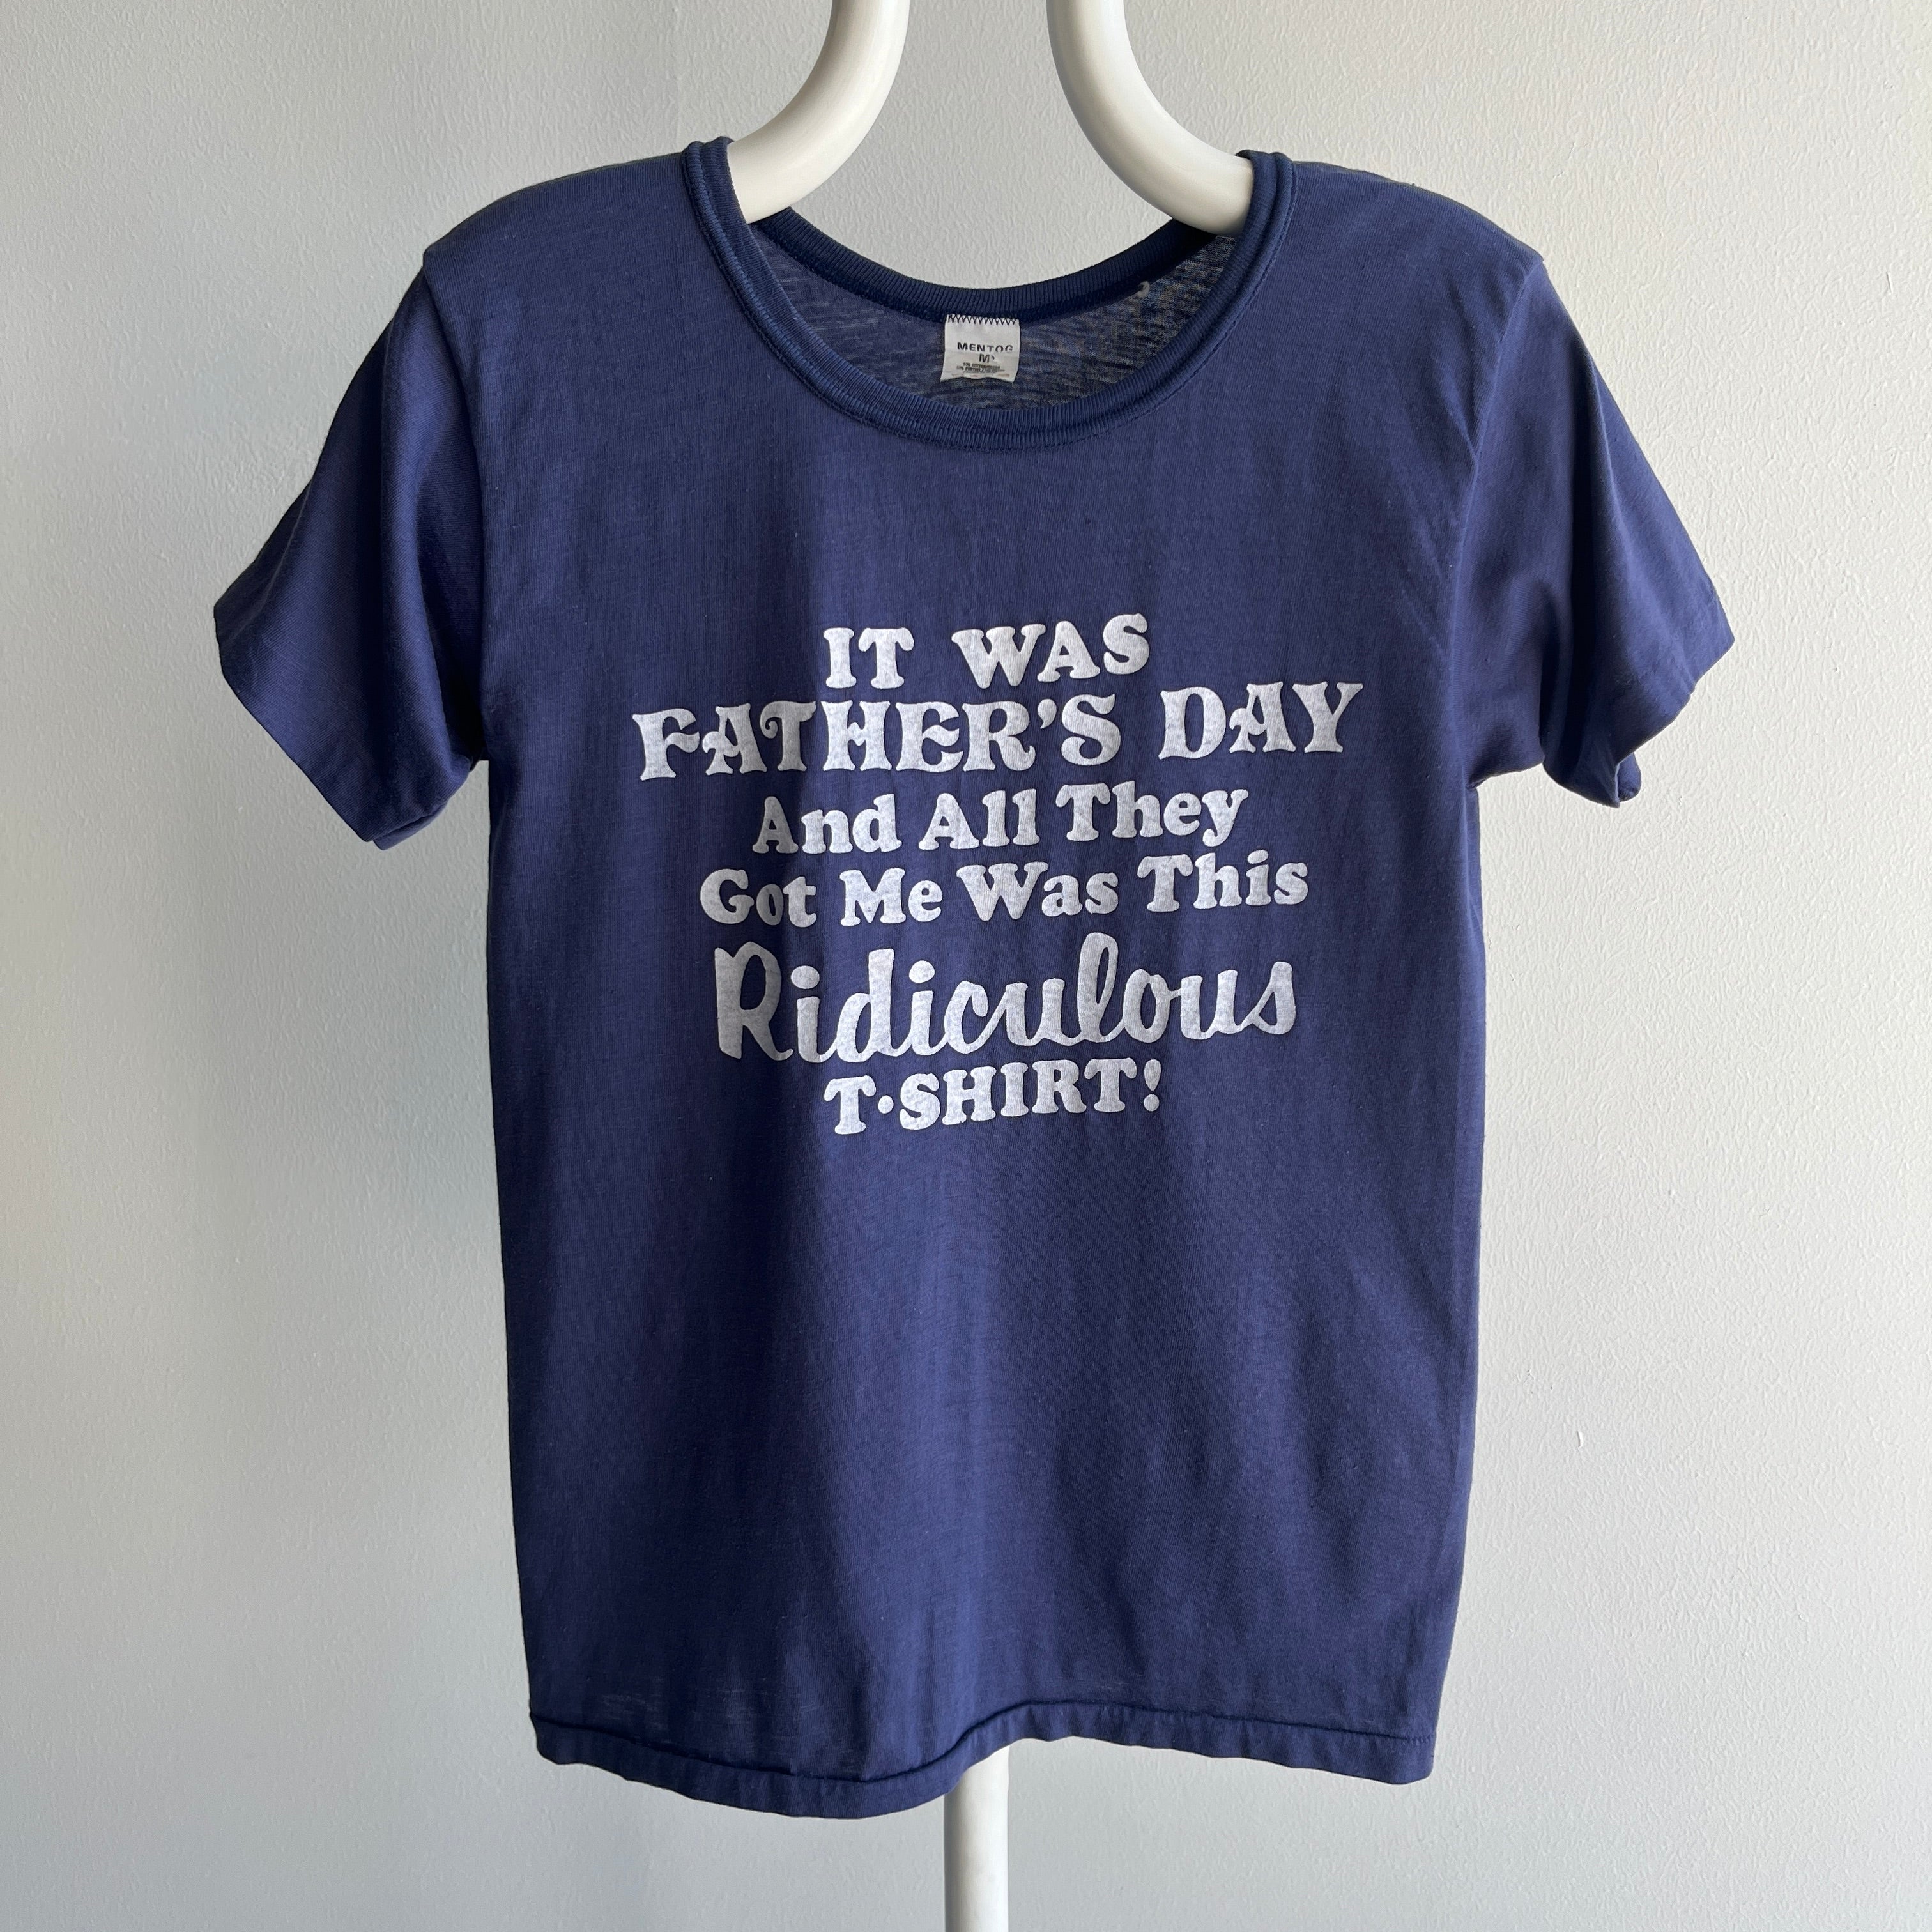 1980s It Was Father's Day and ALL They Got Me... Ring T-Shirt